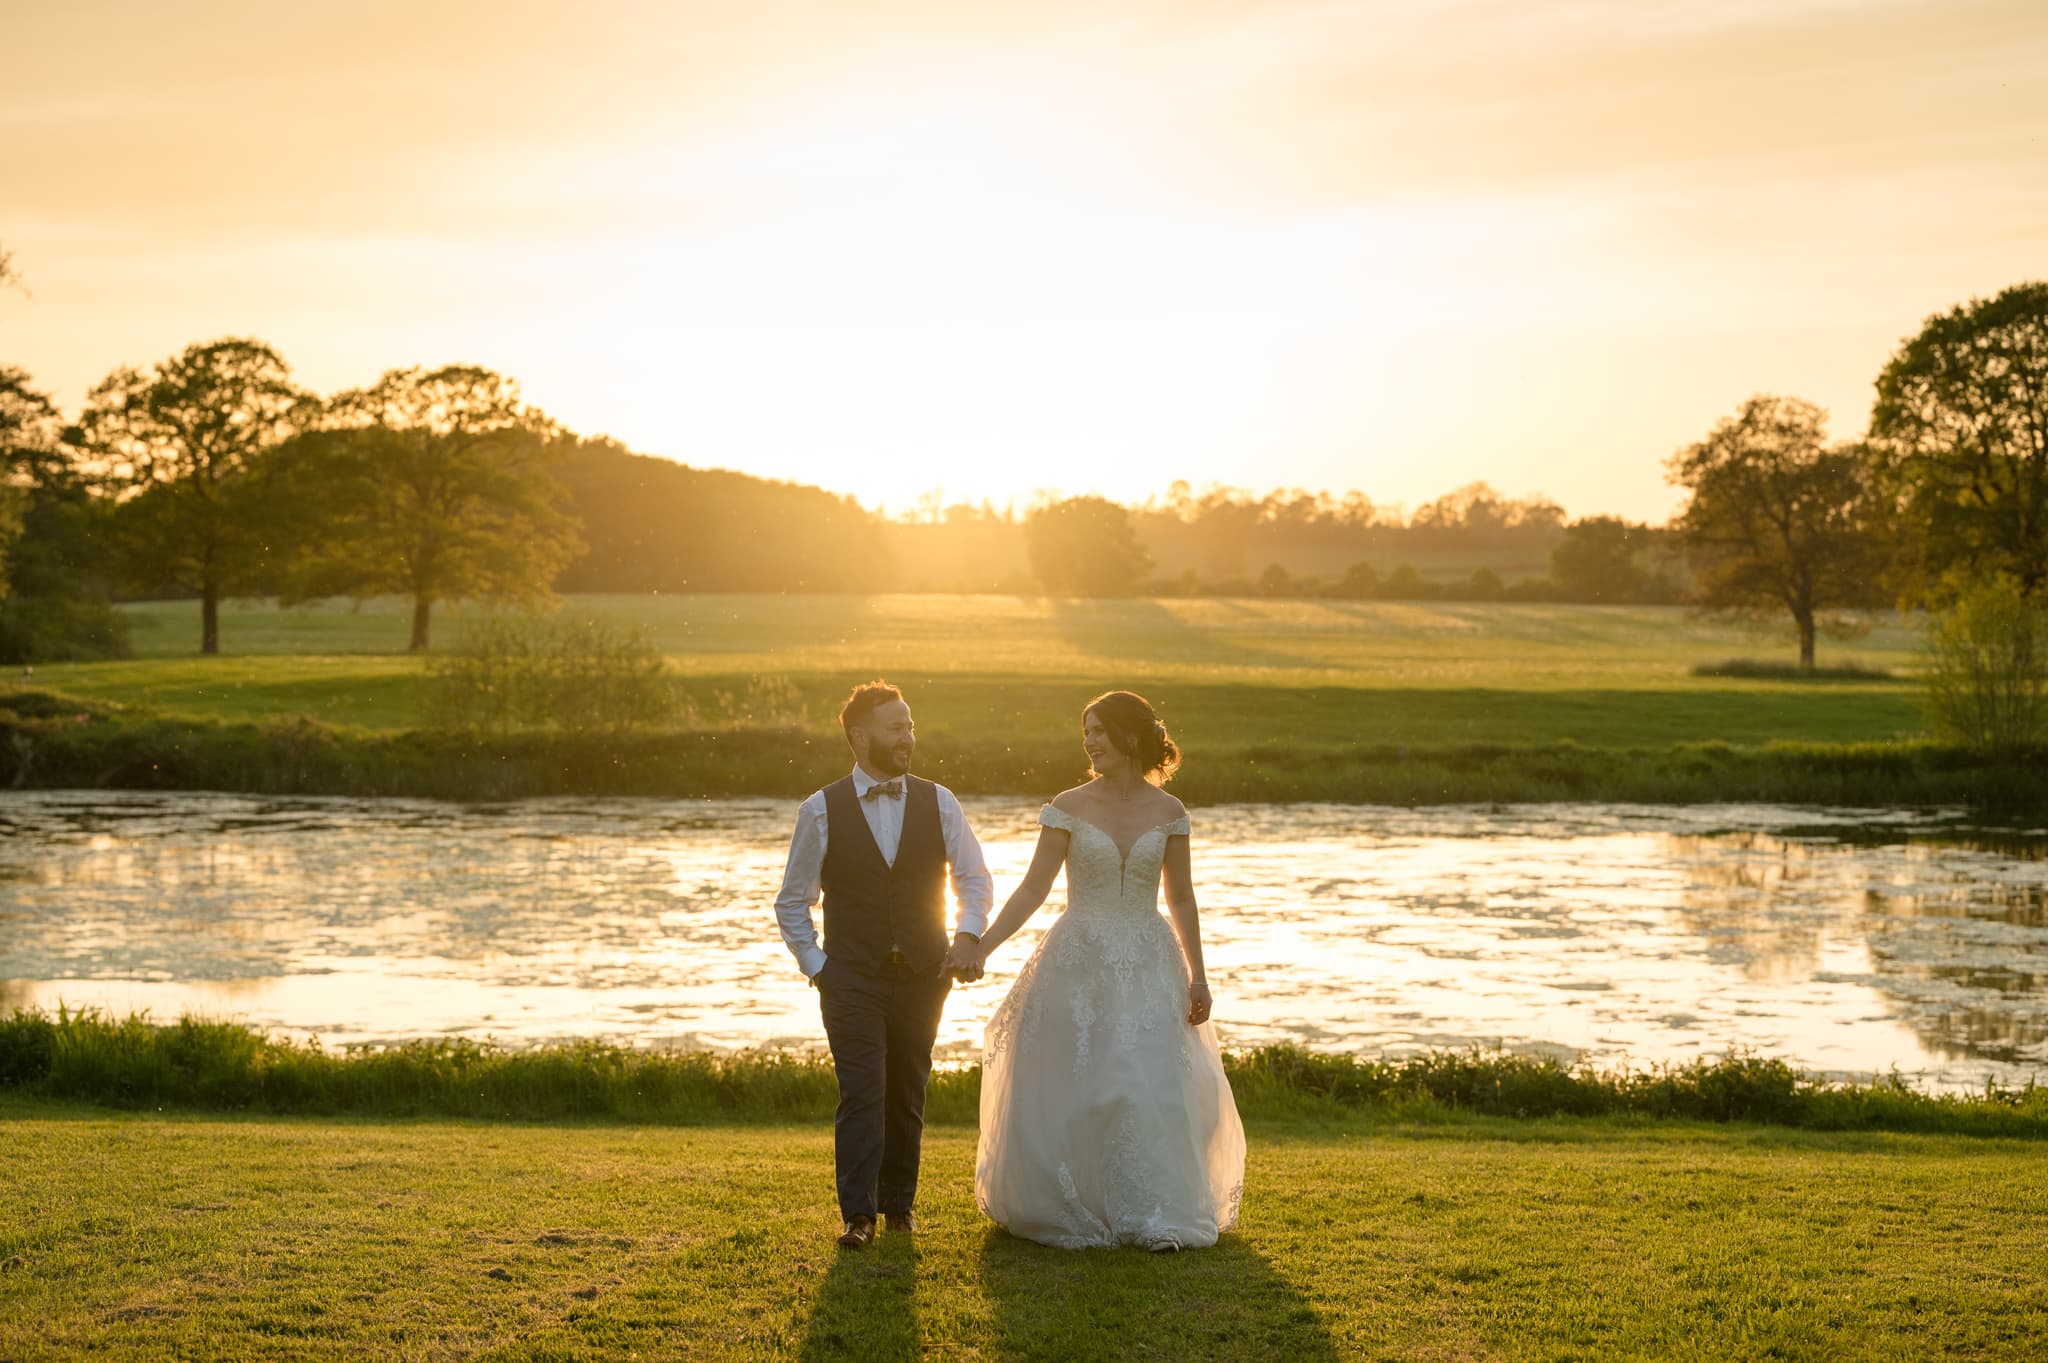 Bride and groom walking hand in hand through a field during golden hour with a countryside view and lake behind them